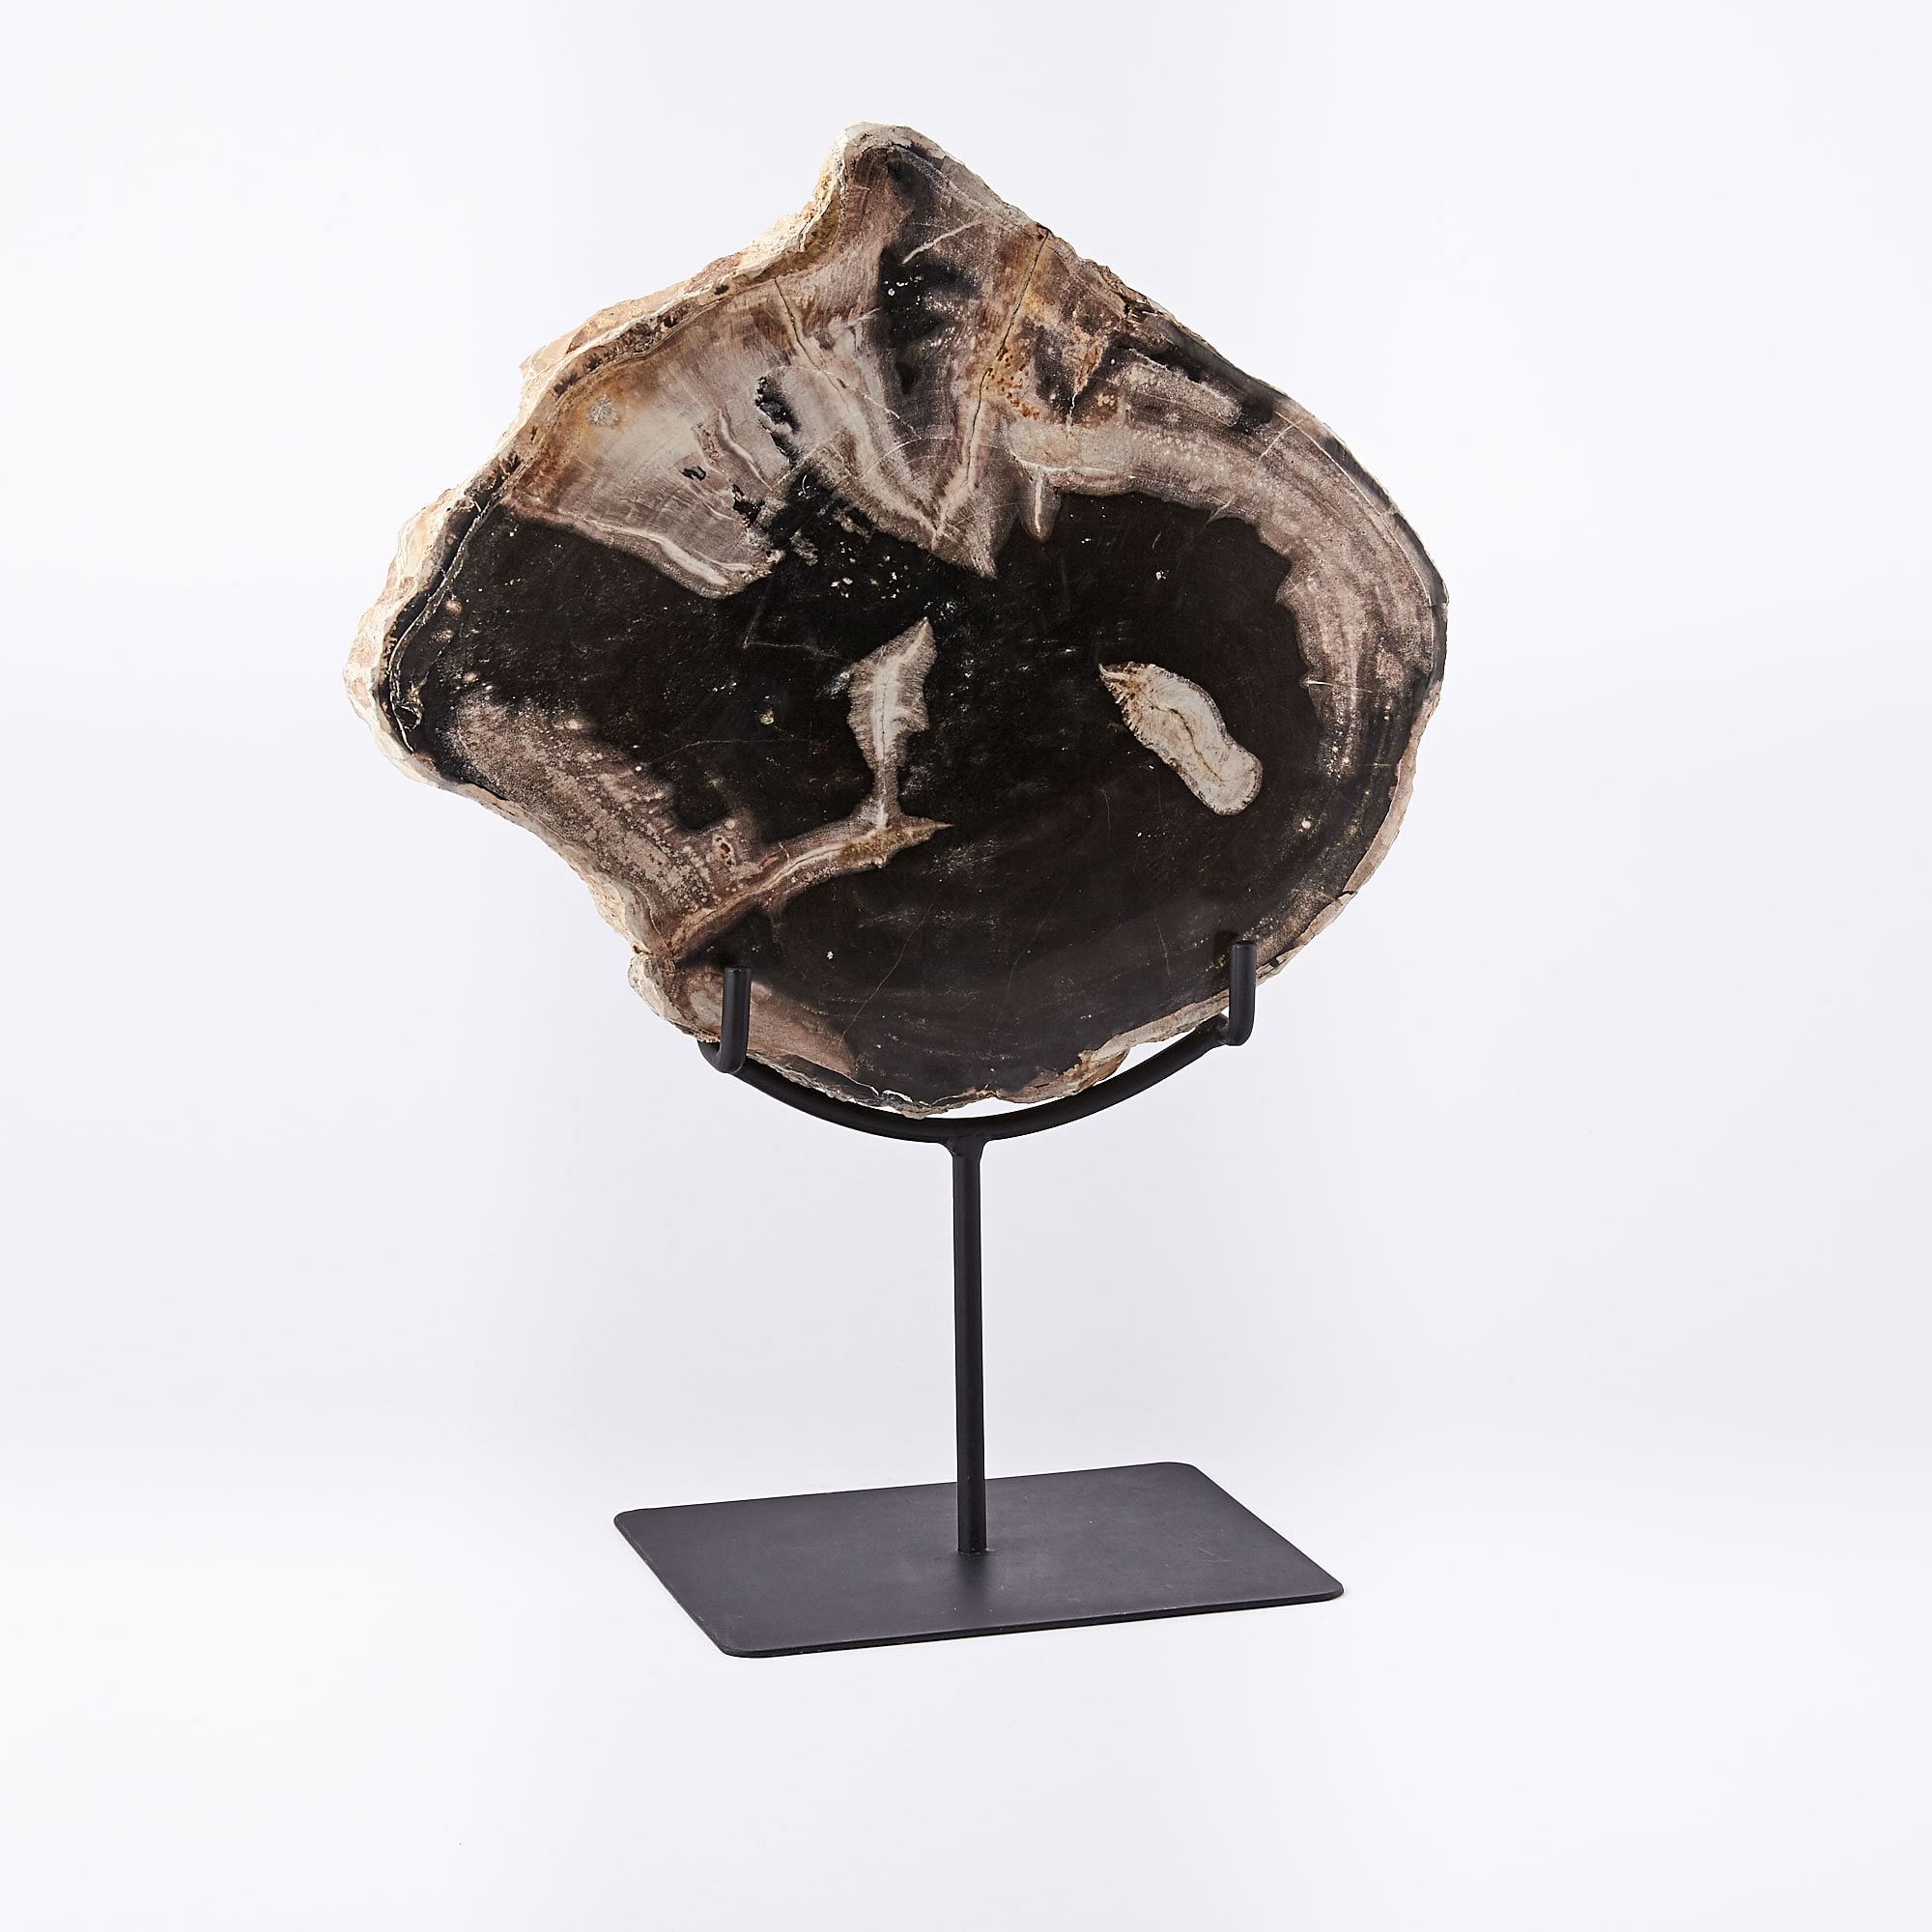 Petrified Wood Object on Stand, Decorative Accents | West Elm